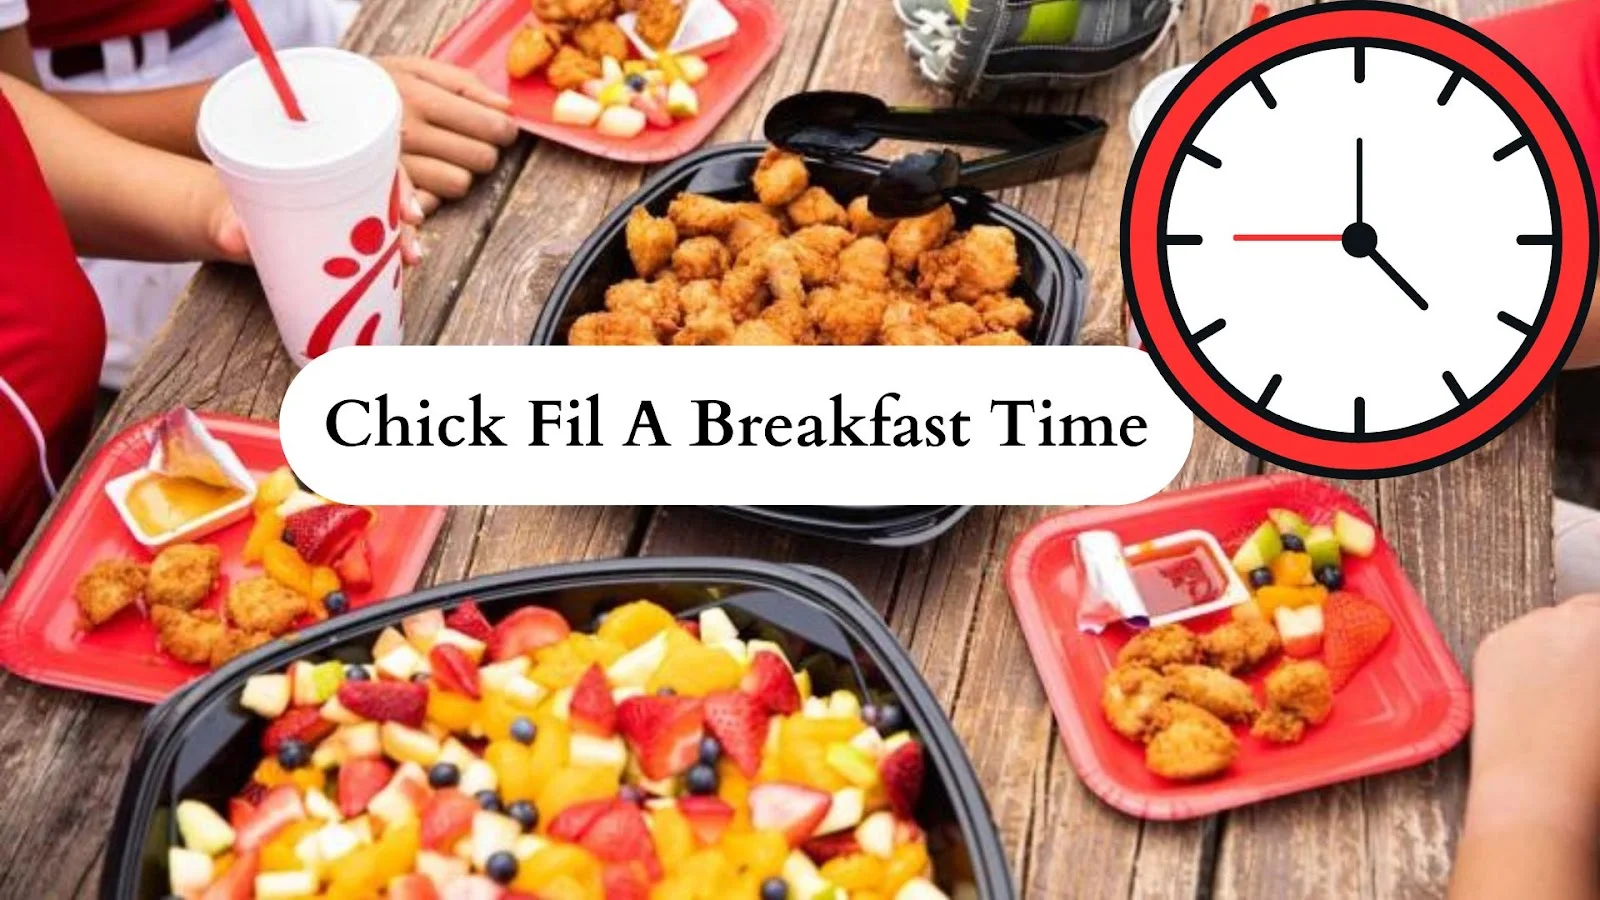 What time does chick-fil-a stop serving breakfast